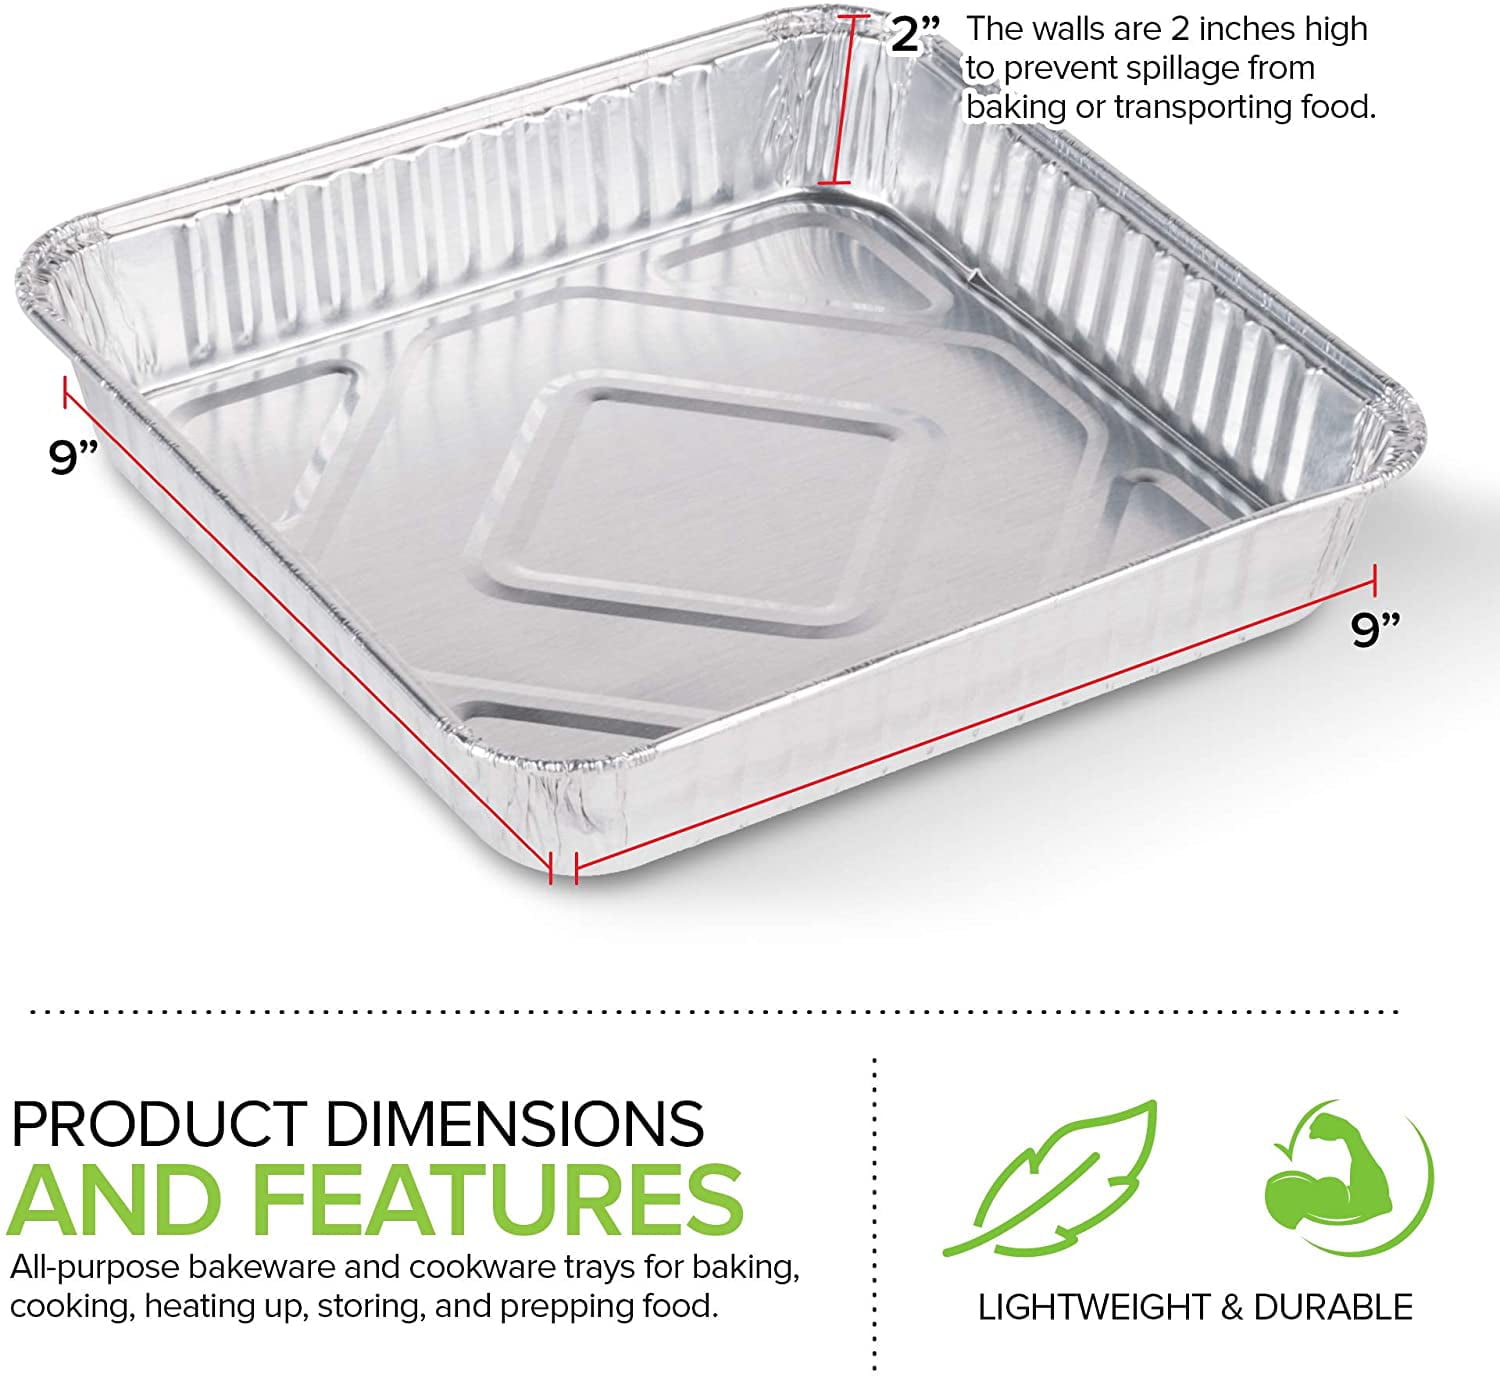 Pack of 30 Extra-Thick Disposable Aluminum Baking Pans | Standard Size 9” x  9” Recyclable Square Cooking Tins | Portable Food Containers | Superior